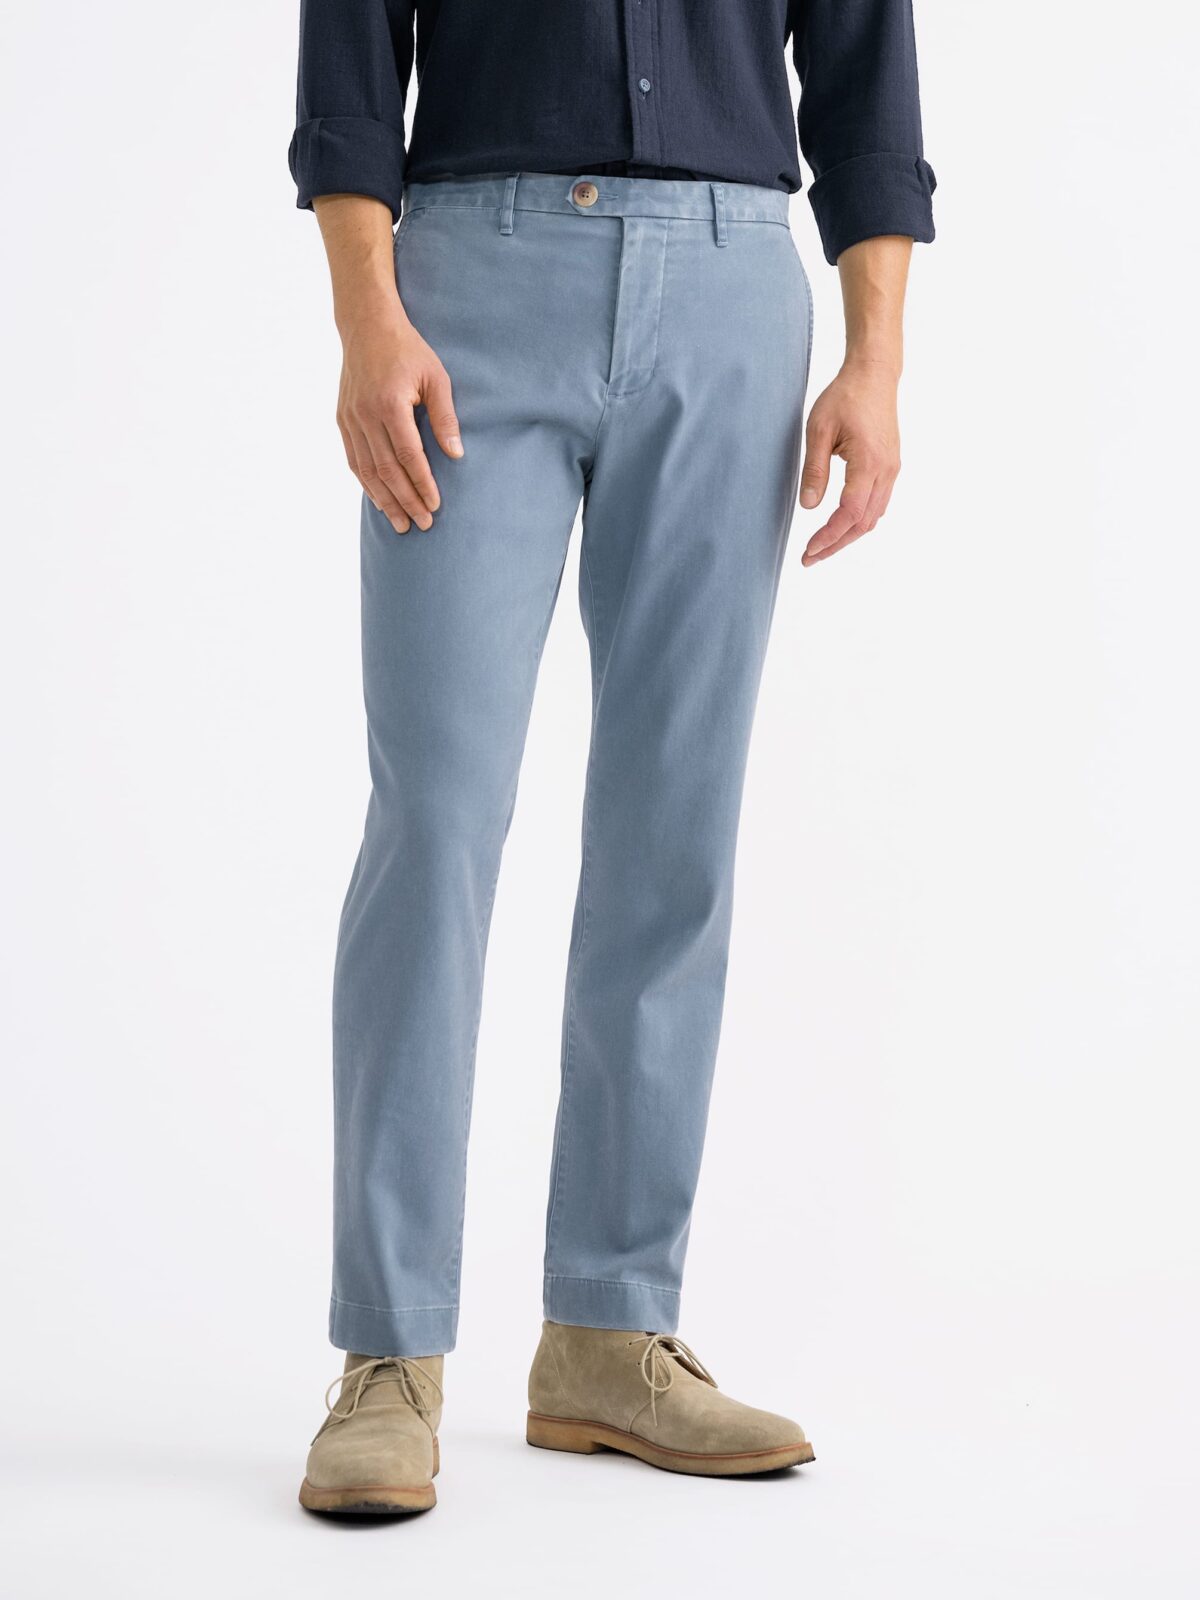 Buy Urbano Fashion Men Steel Blue Cotton Slim Fit Casual Chinos Trousers  Stretch online